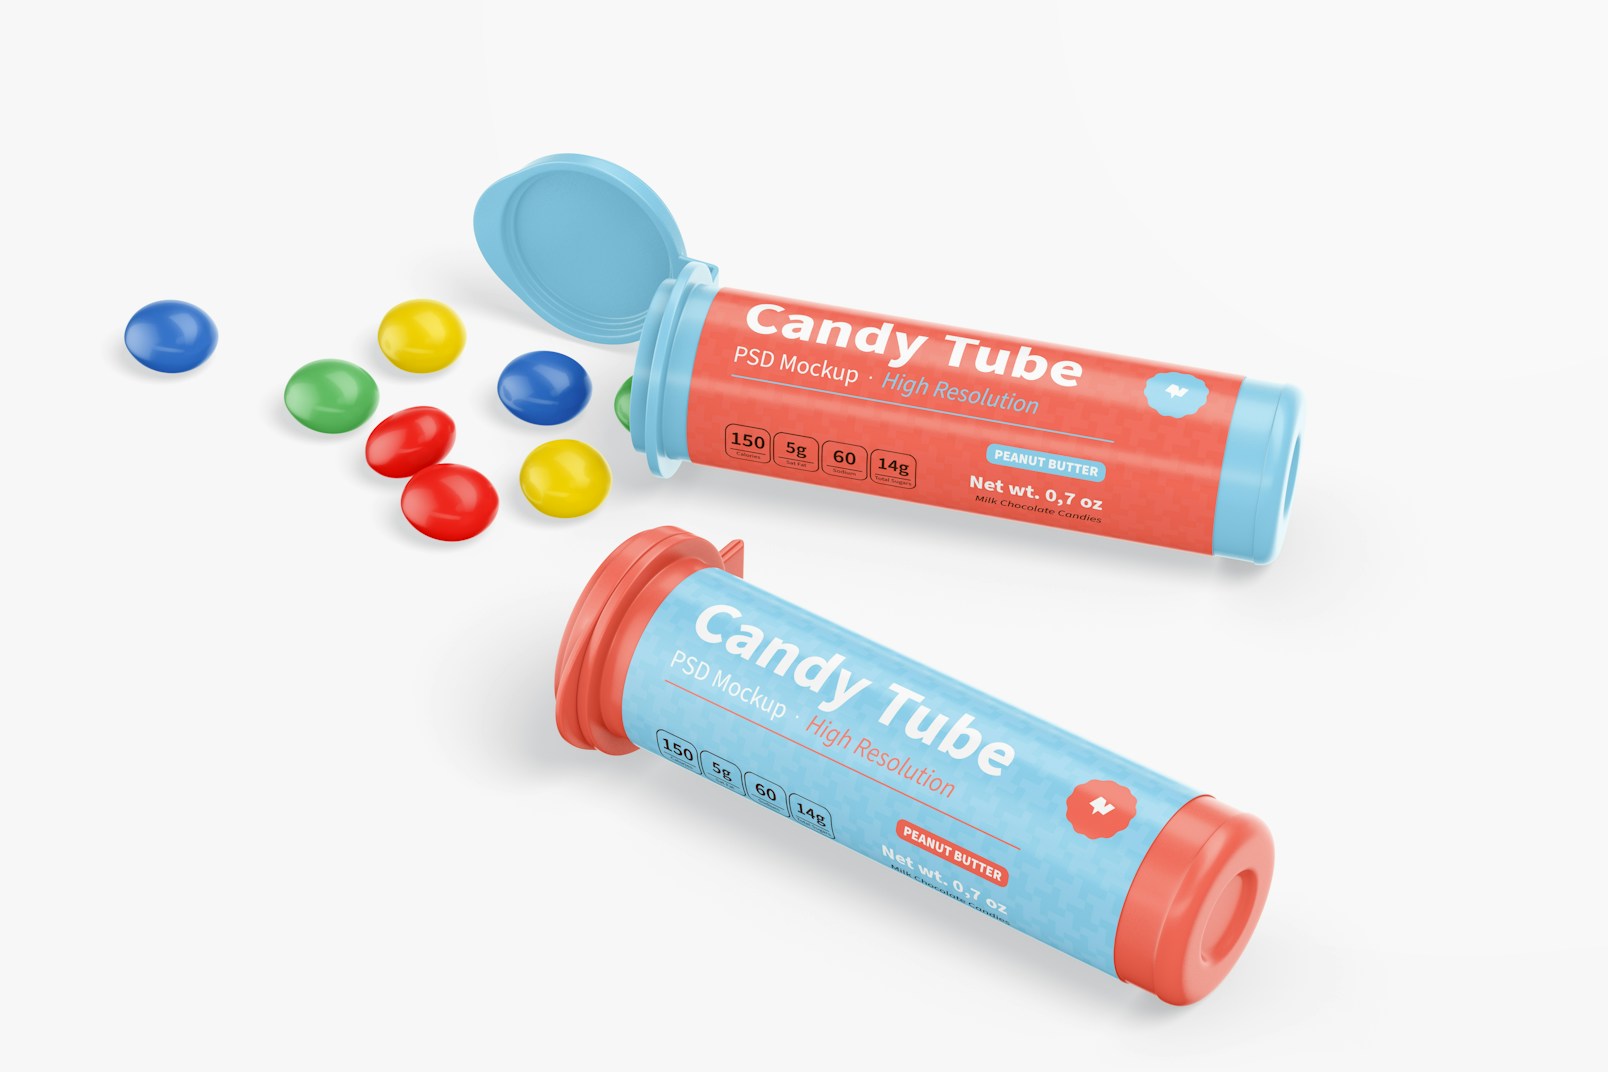 Candy Tubes with Flip Cap Mockup, Dropped